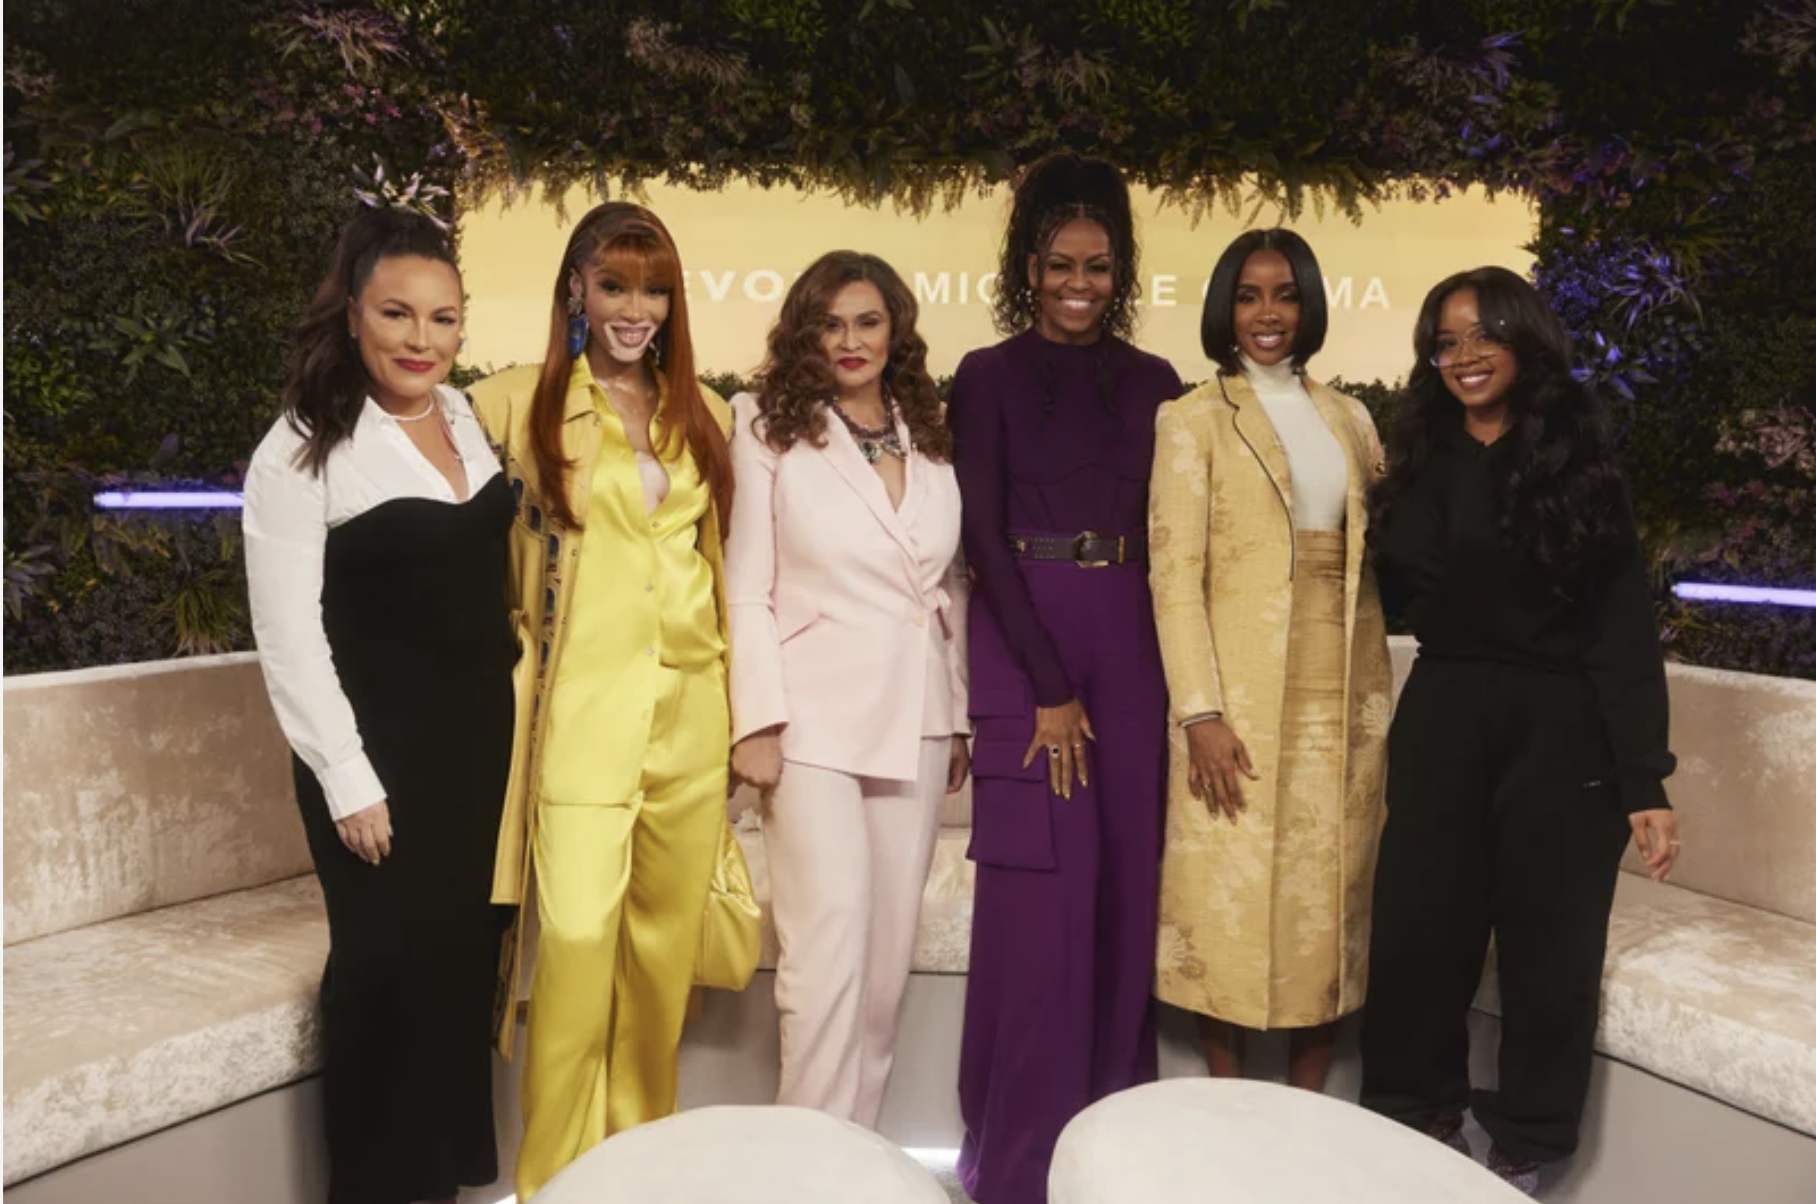 REVOLT x Michelle Obama: Angie Martinez Hosts Special Featuring Forever FLOTUS, Kelly Rowland, Tina Knowles-Lawson, Winnie Harlow & H.E.R.